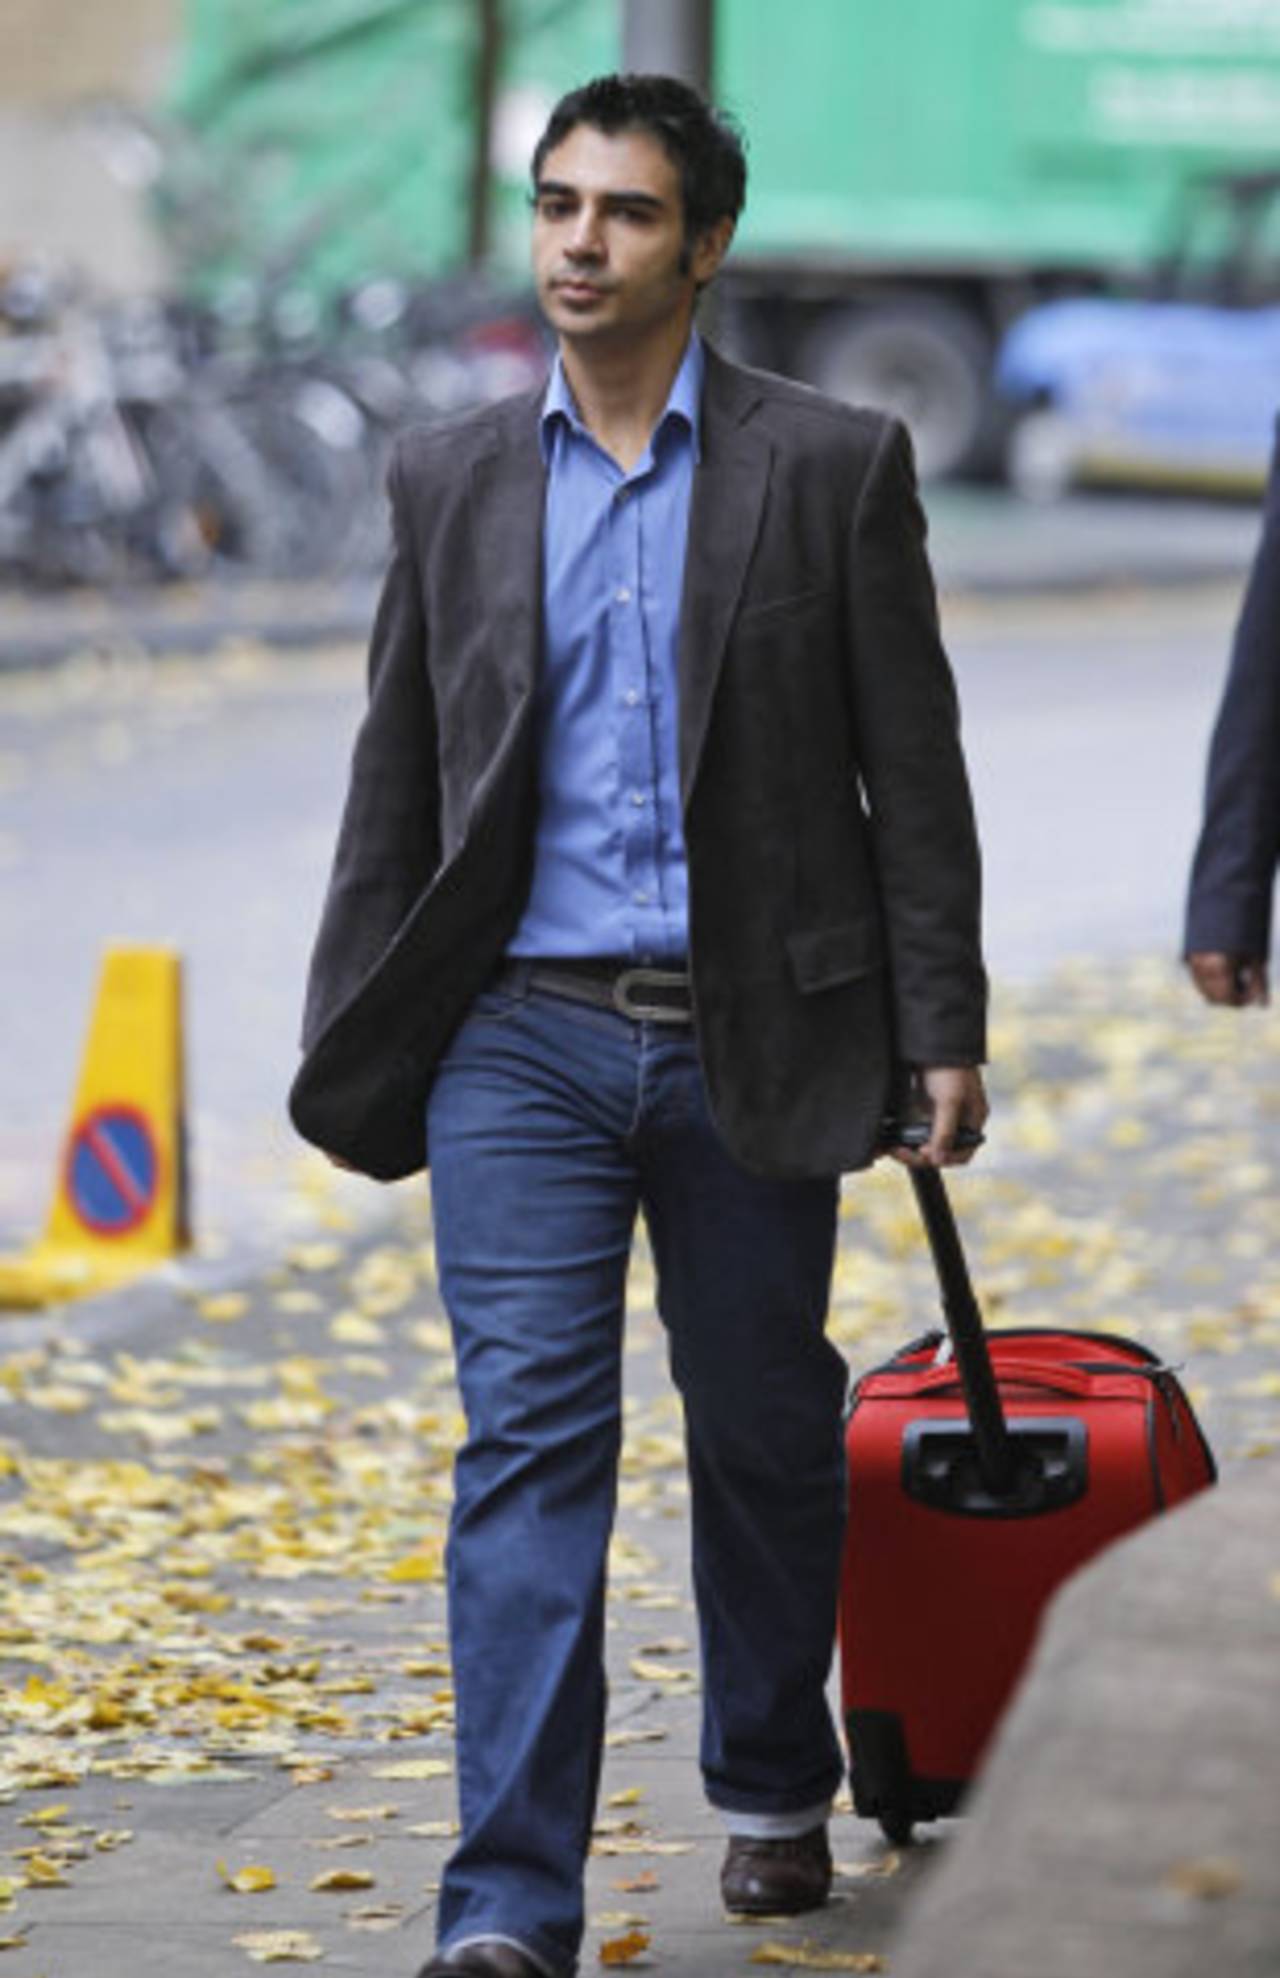 Salman Butt heads to court on the day the verdicts were delivered, London, November 1, 2011